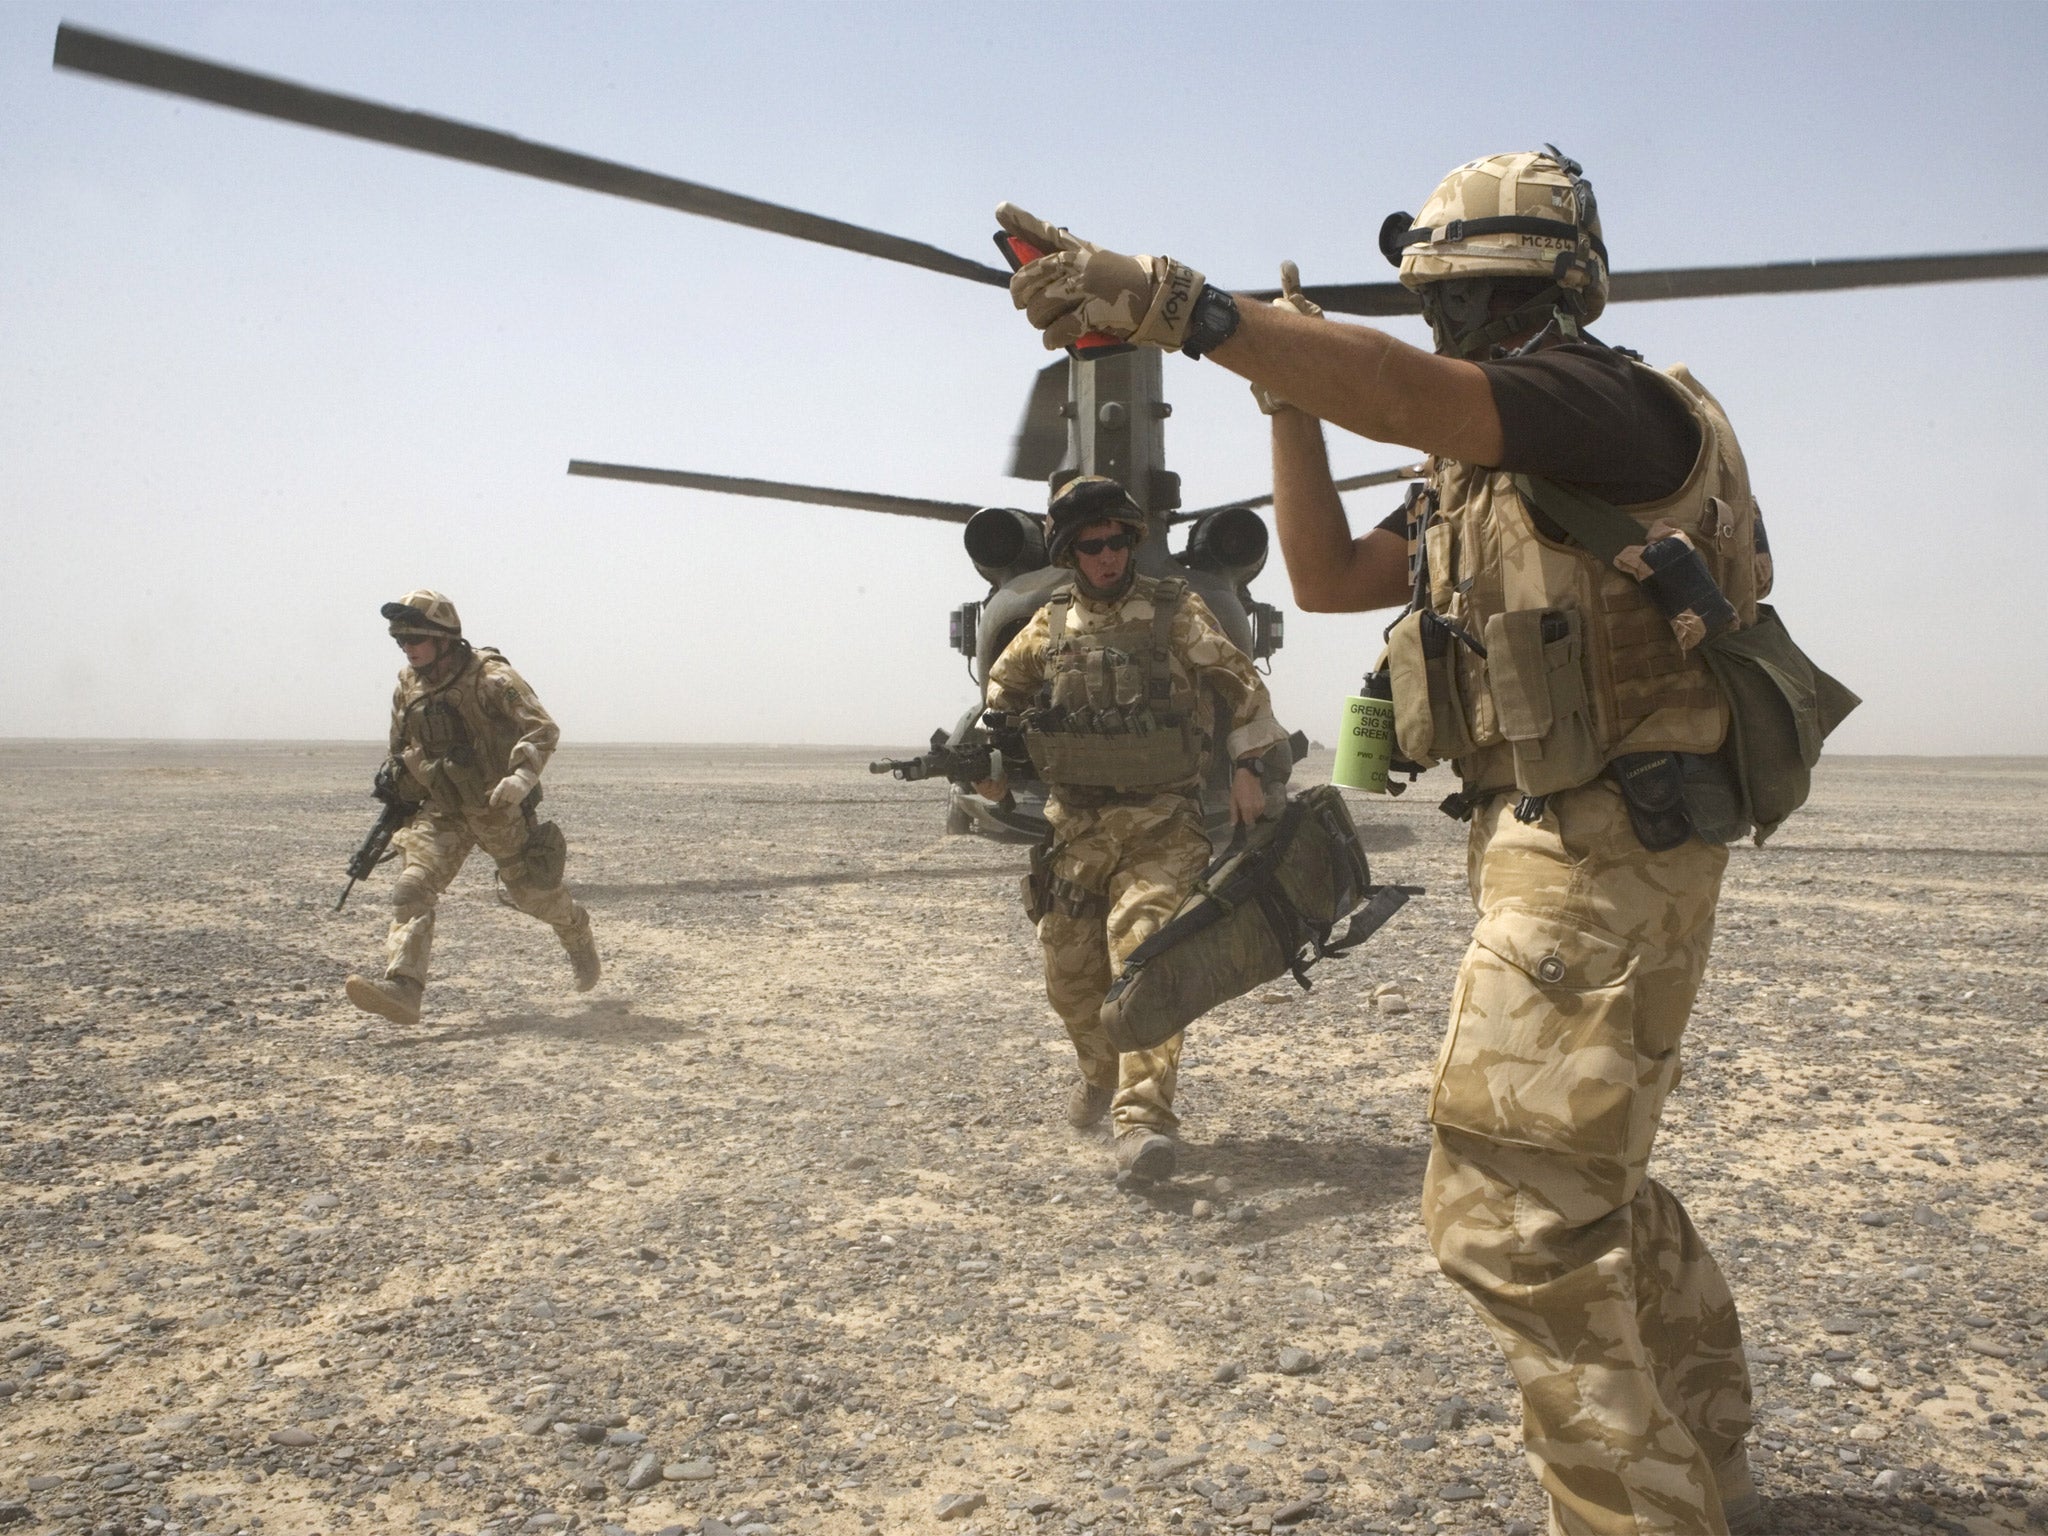 The war in Afghanistan is costing £2.5 billion a year